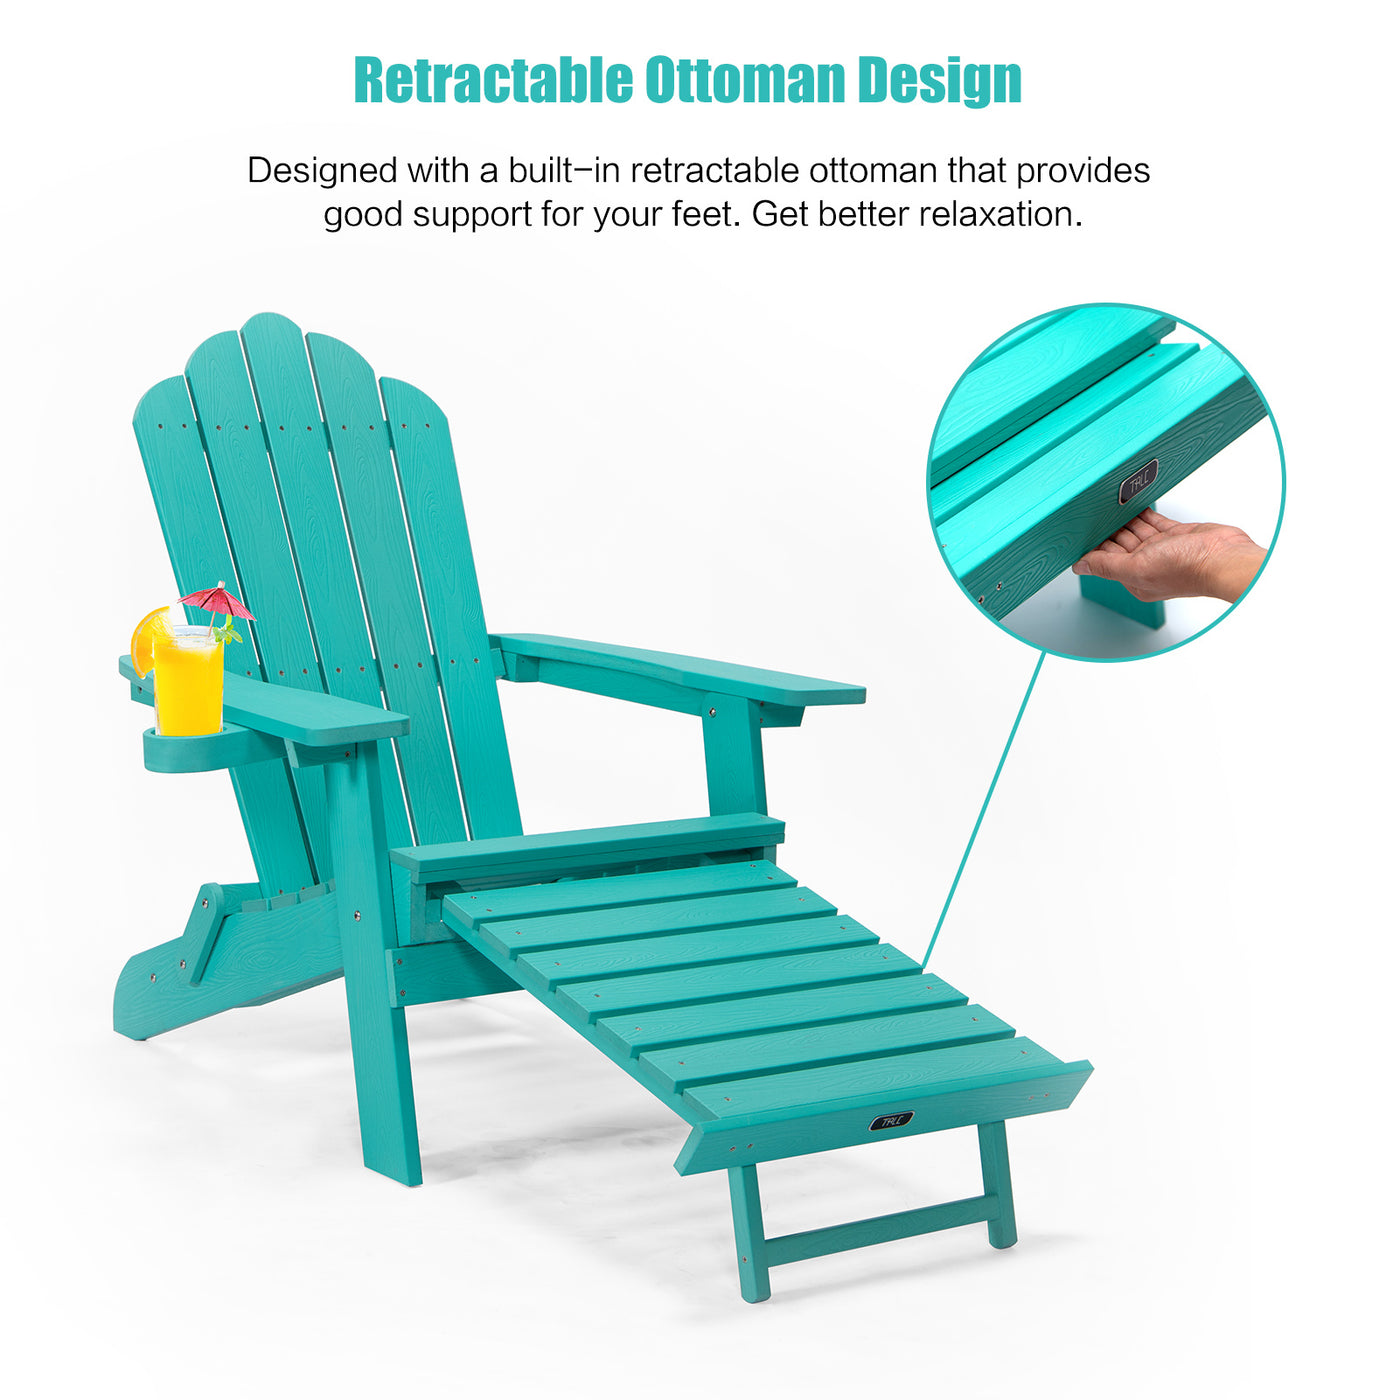 Adirondack Chair with Cup Holder and Pullout Ottoman